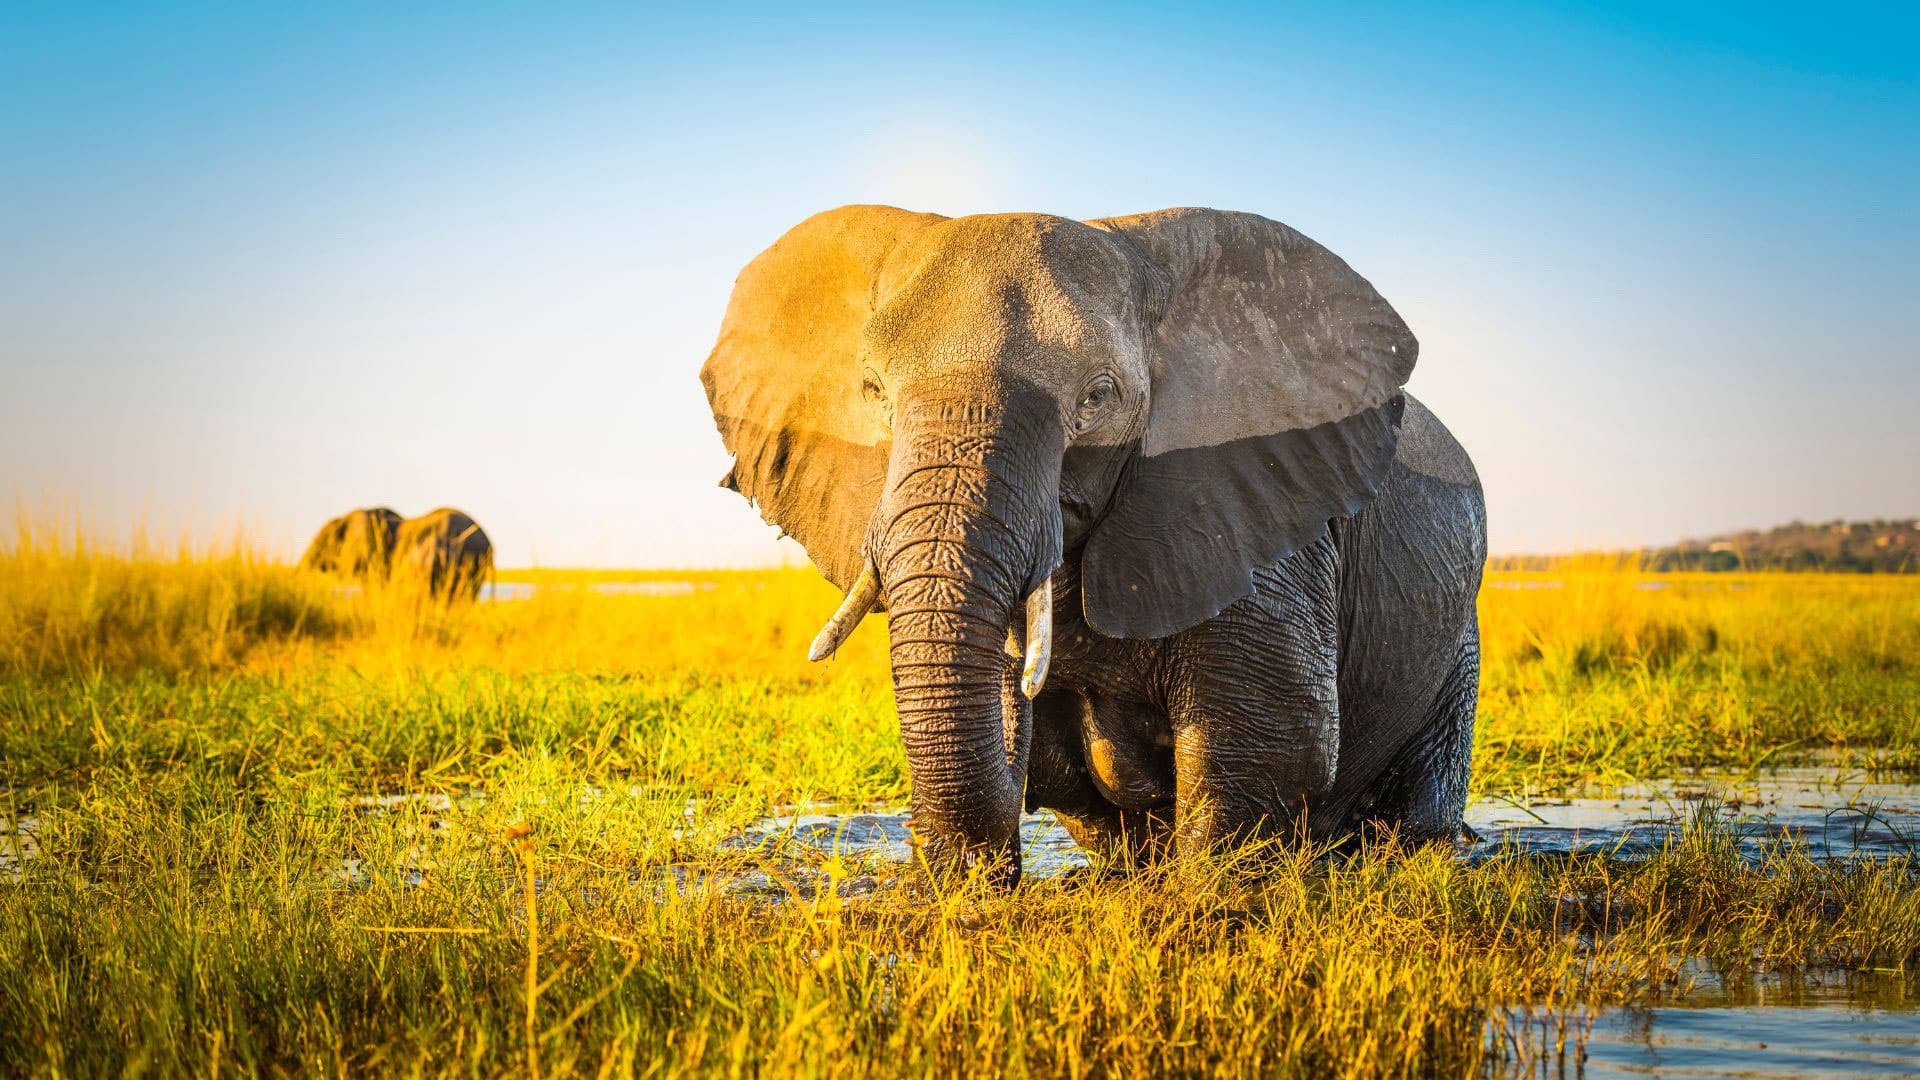 Elephant genes could hold the key to avoiding cancers, study thumbnail